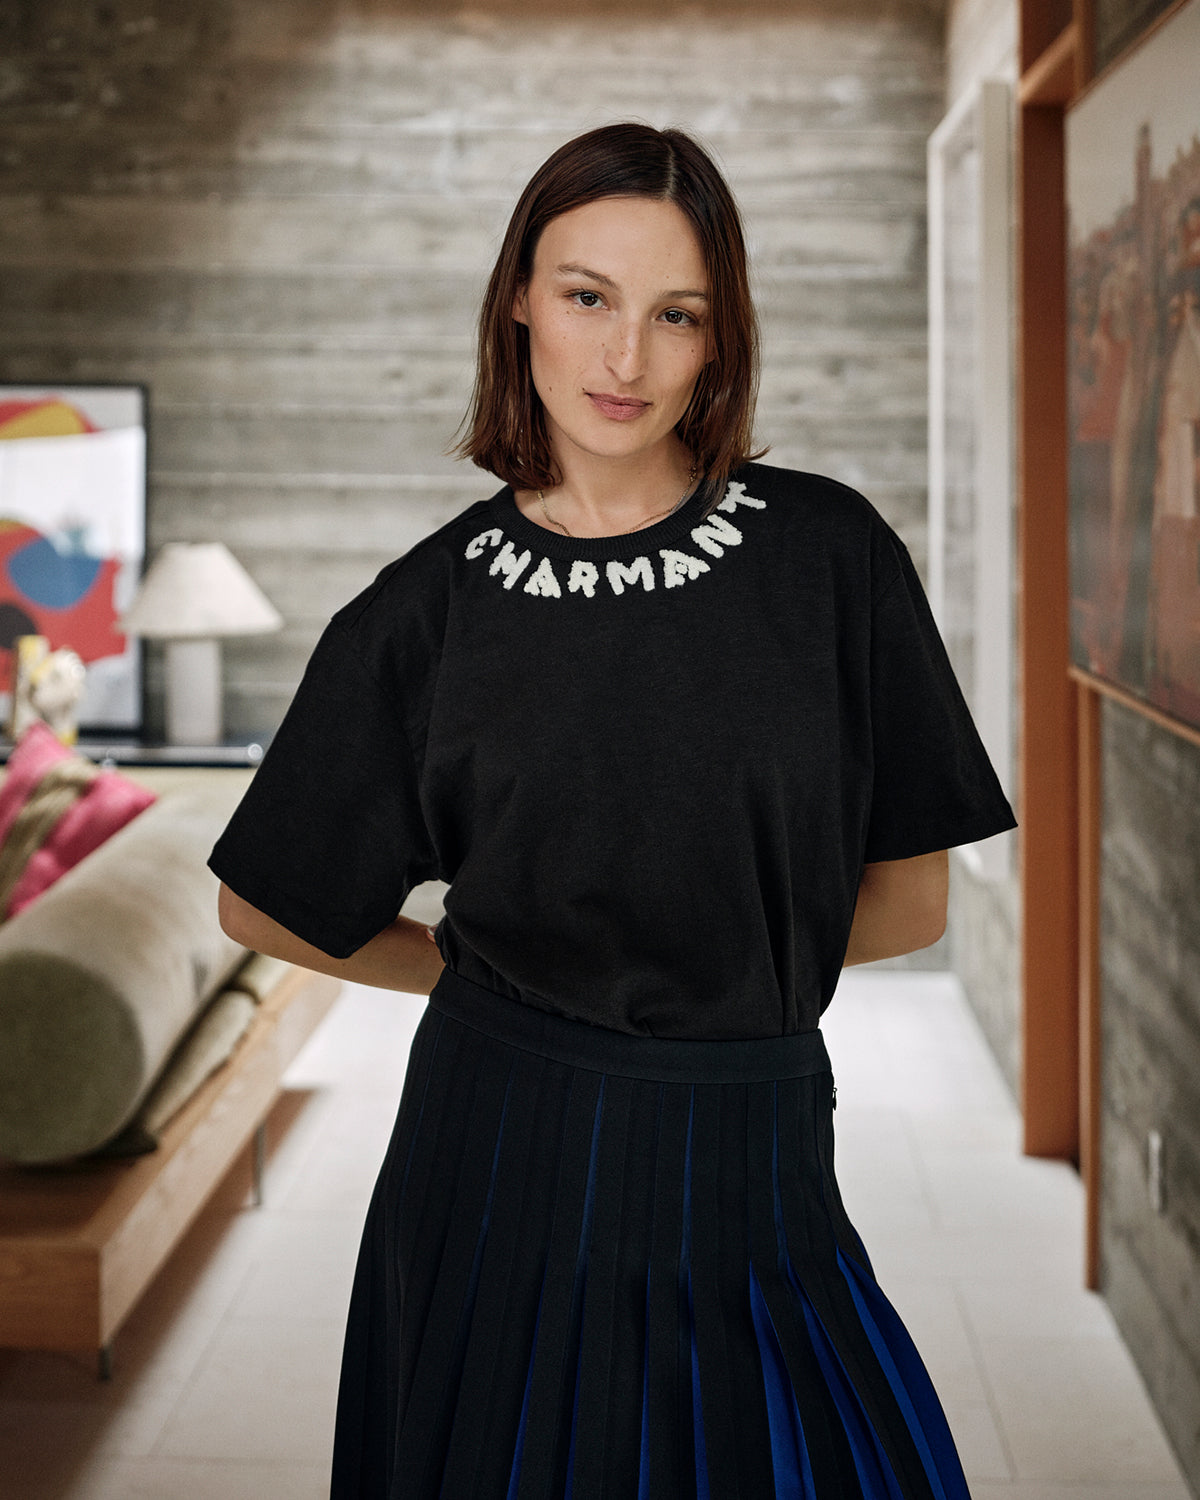 Zoe wearing the Black w/ Cream Charmant Tee tucked in to the pleated skirt.